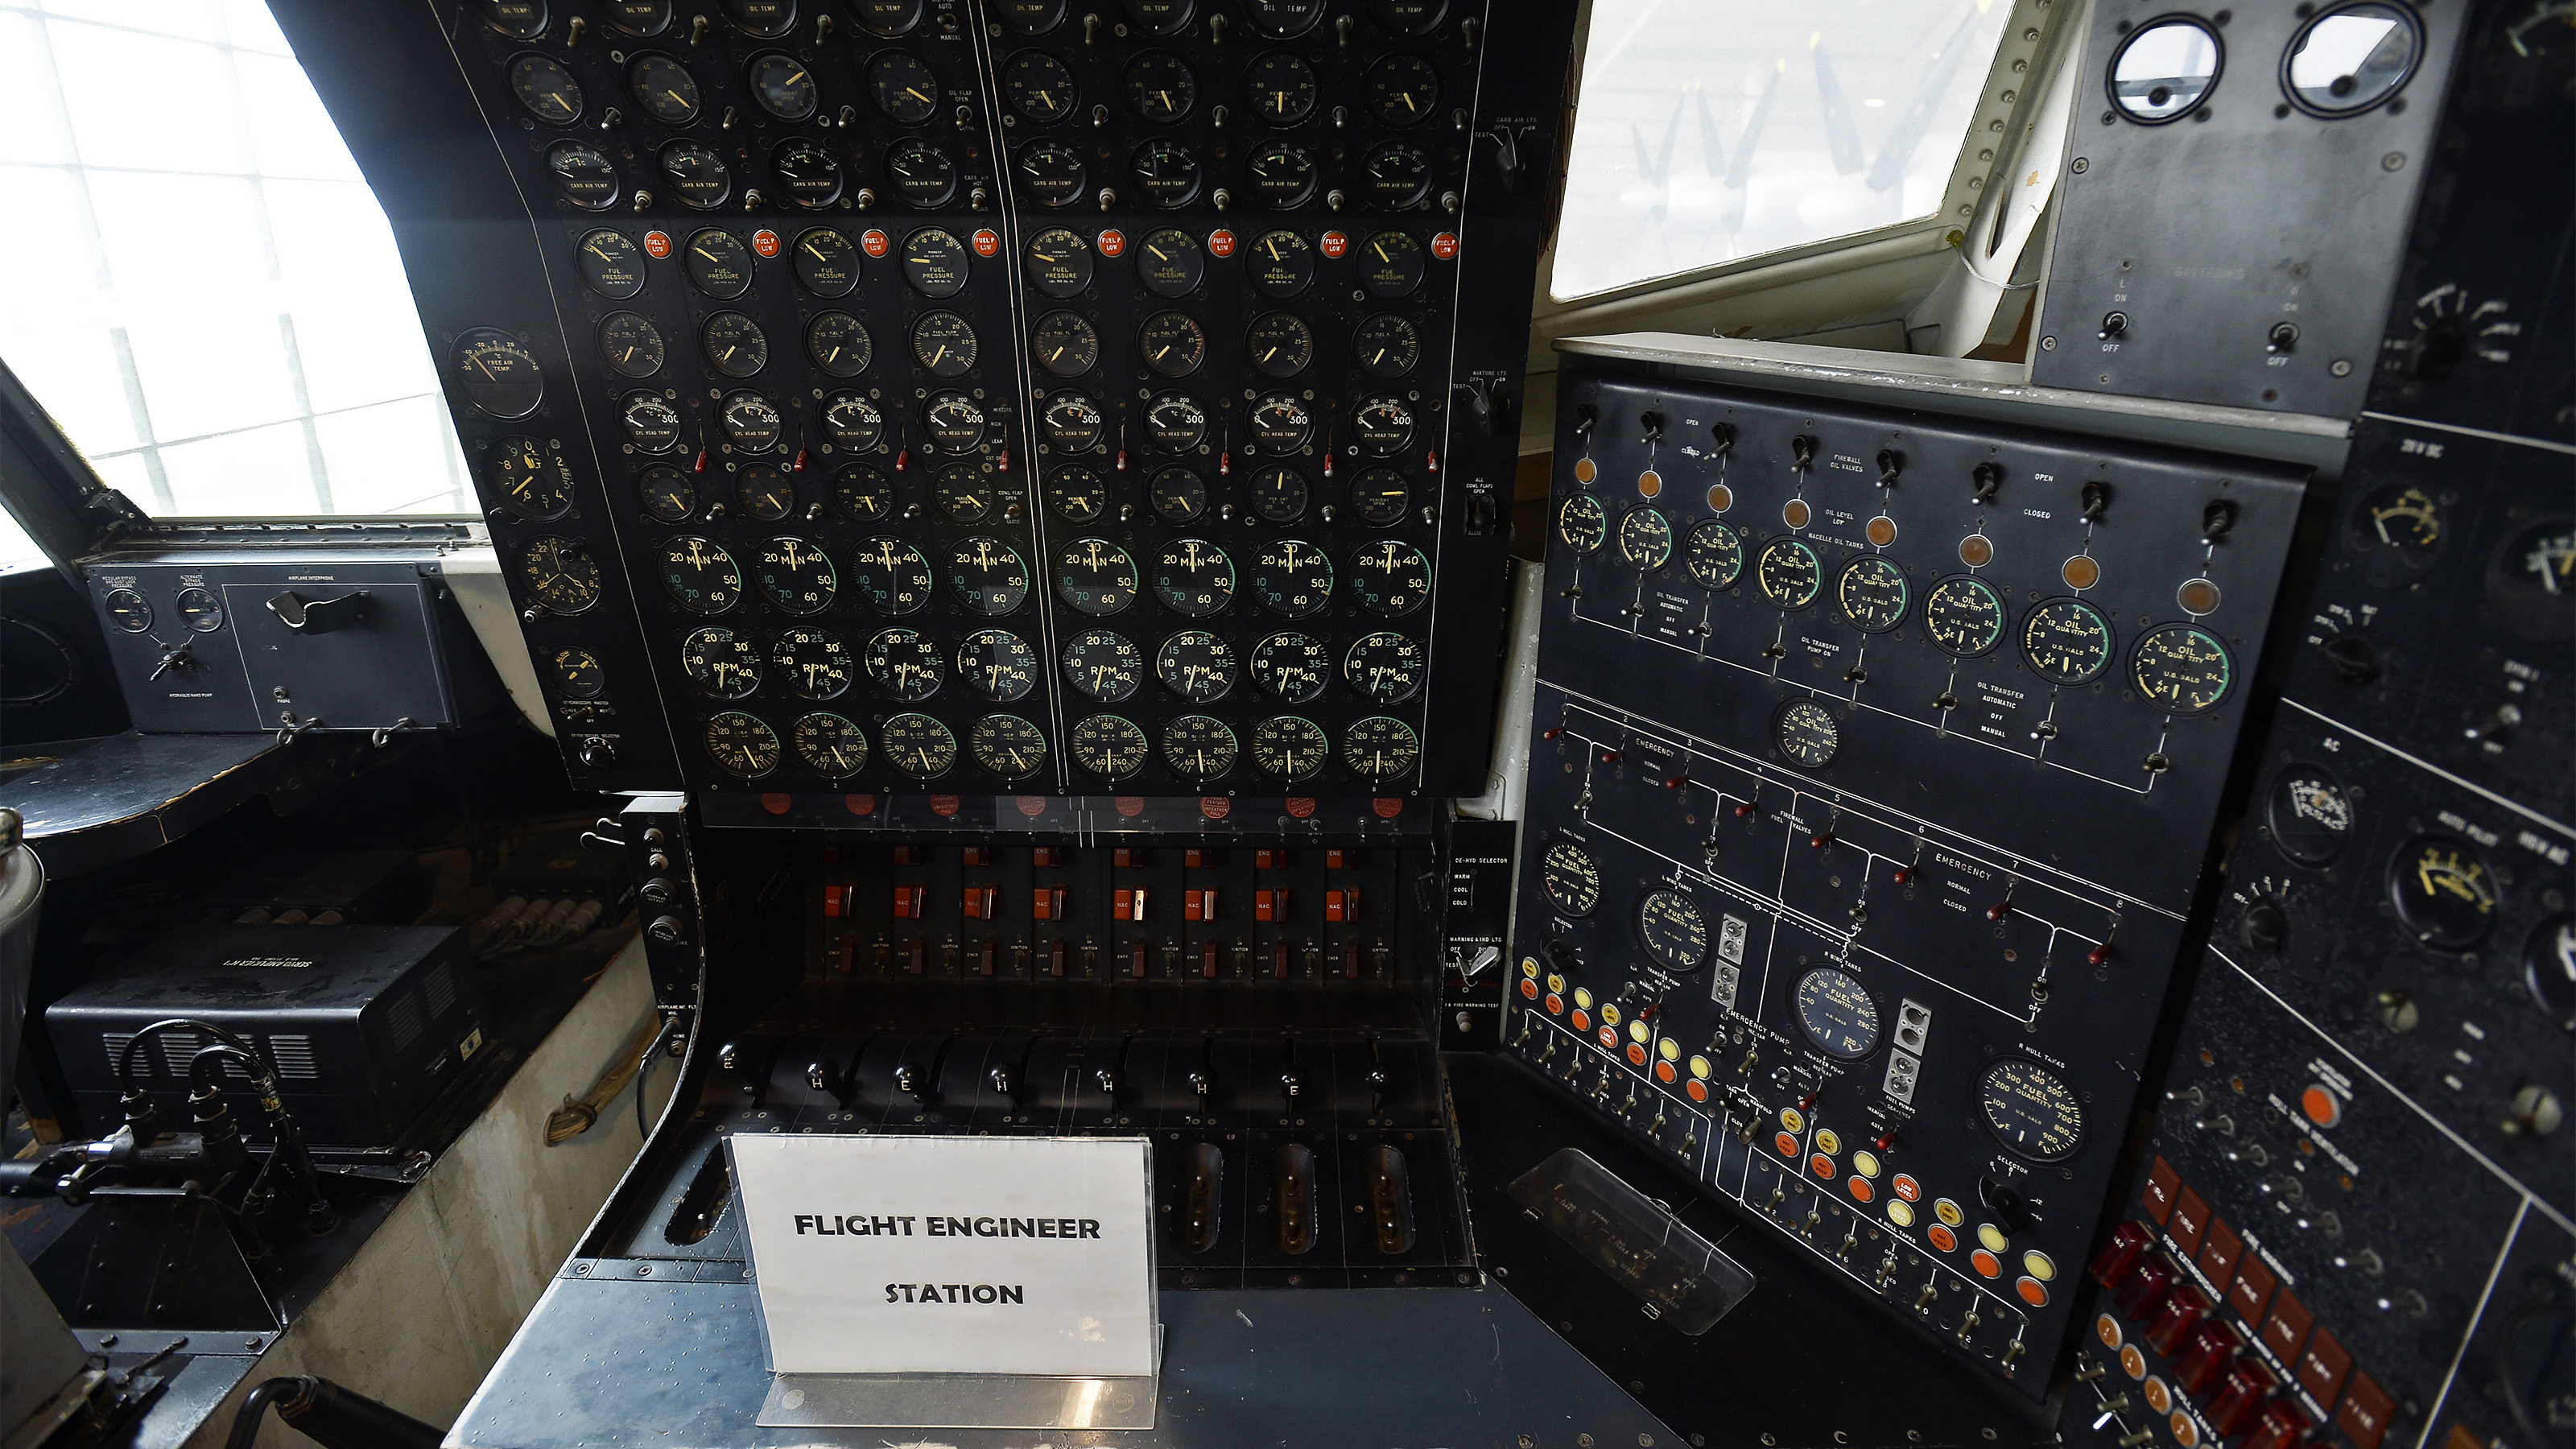 The Hughes H-4 flying boat has hundreds of switches, dials, and gauges. Photo by David Tulis.